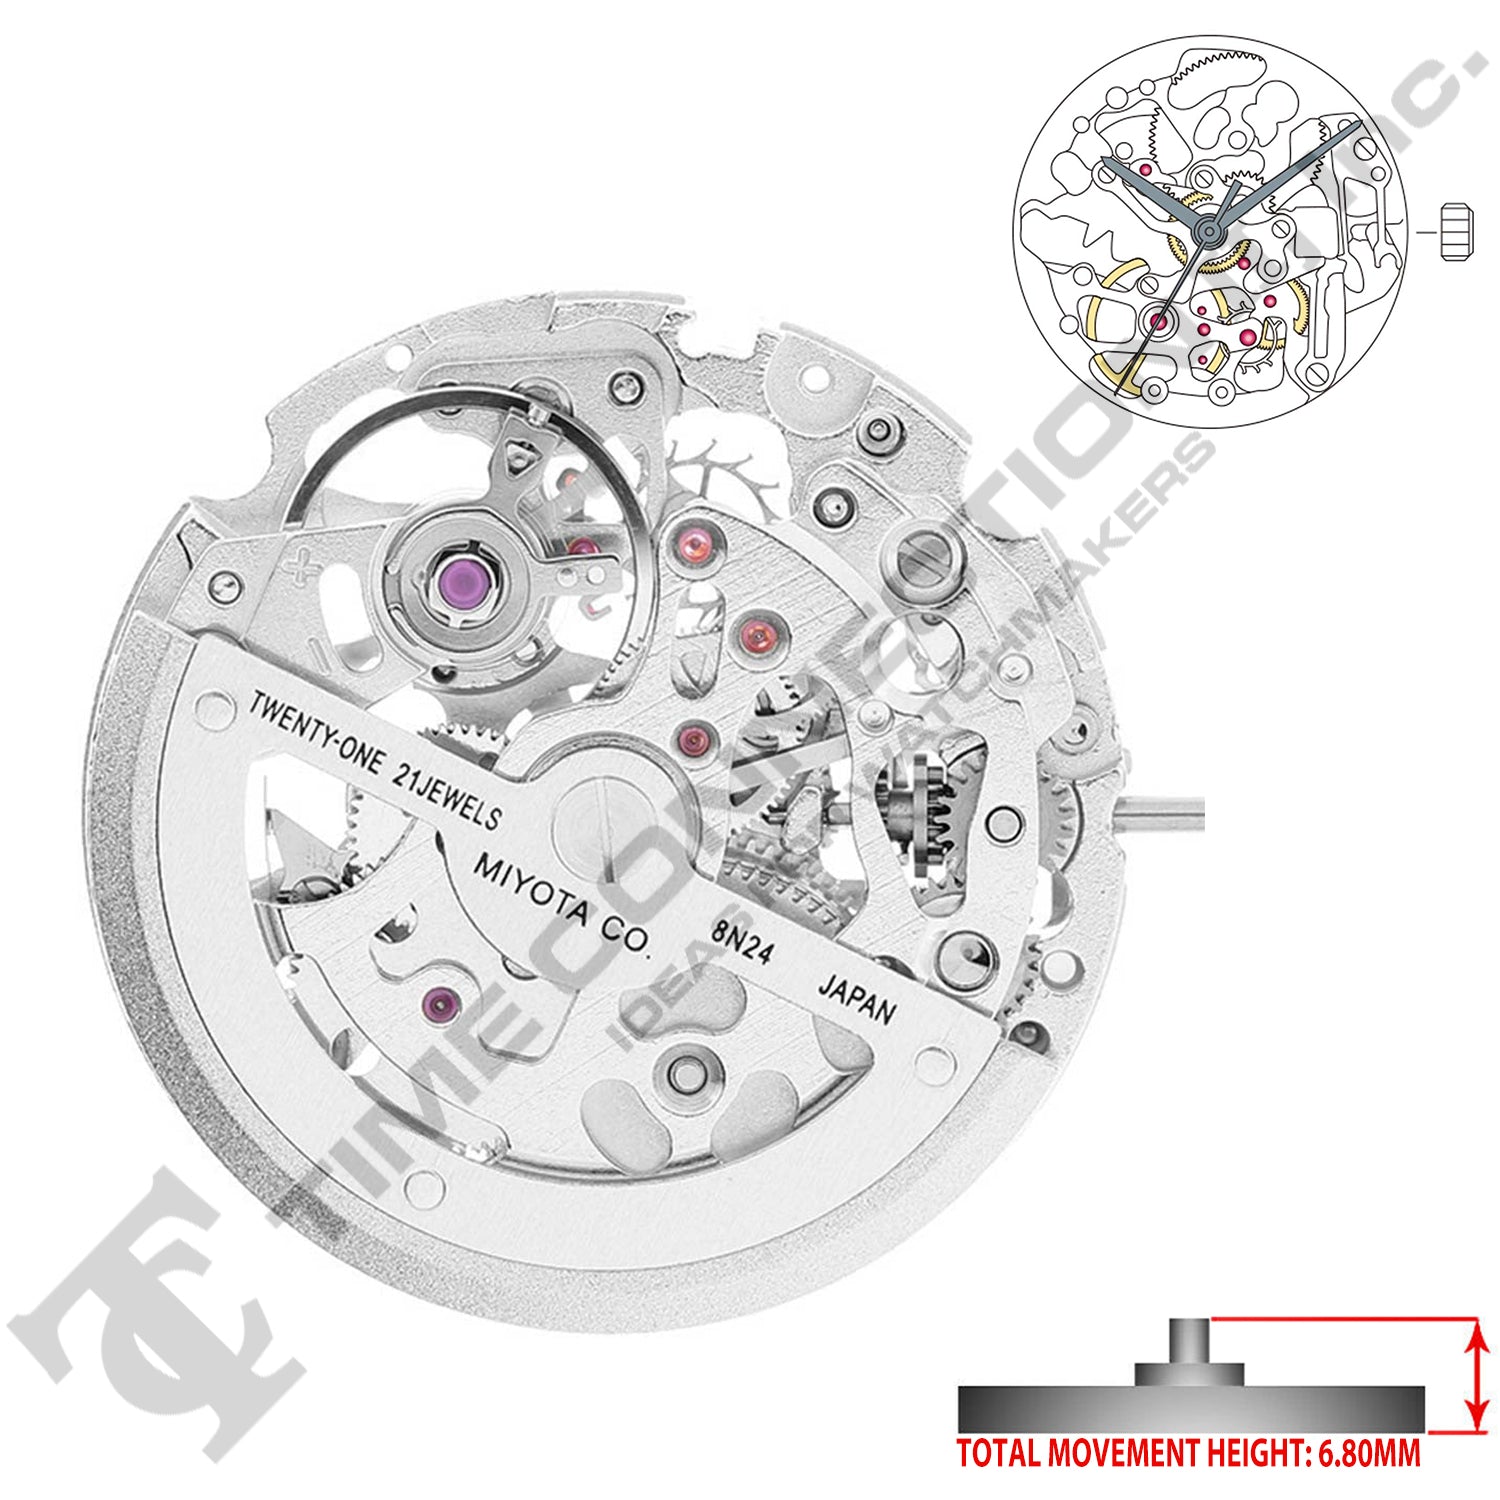 Miyota/Citizen LTD 8N24 Stainless Steel Japan Automatic Movement Ht. 6.8MM